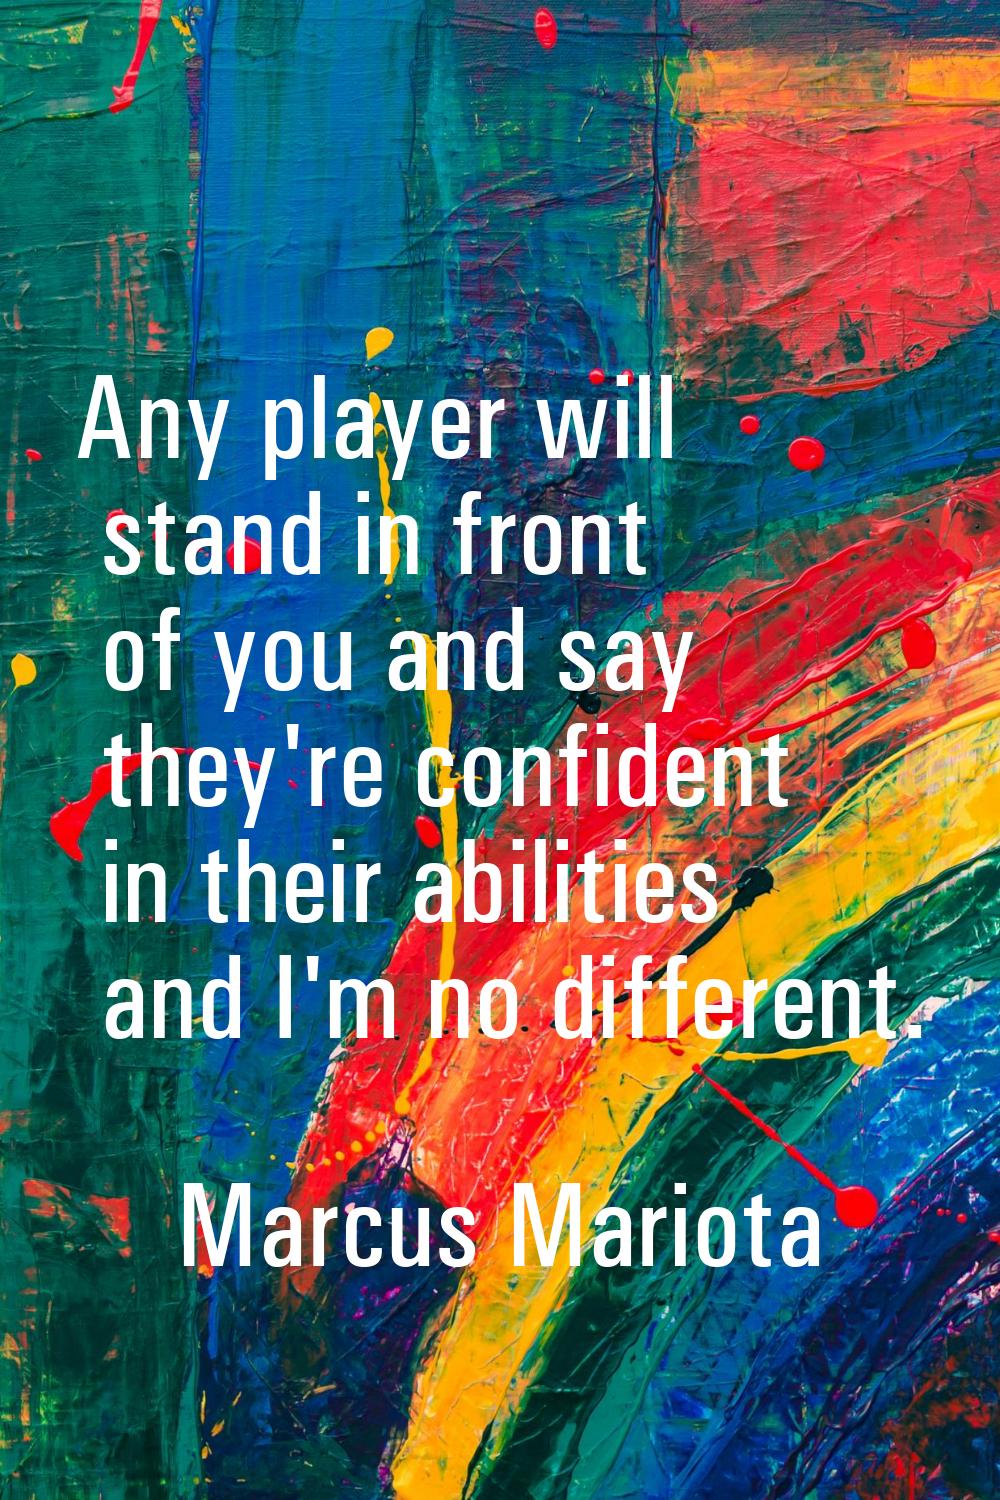 Any player will stand in front of you and say they're confident in their abilities and I'm no diffe